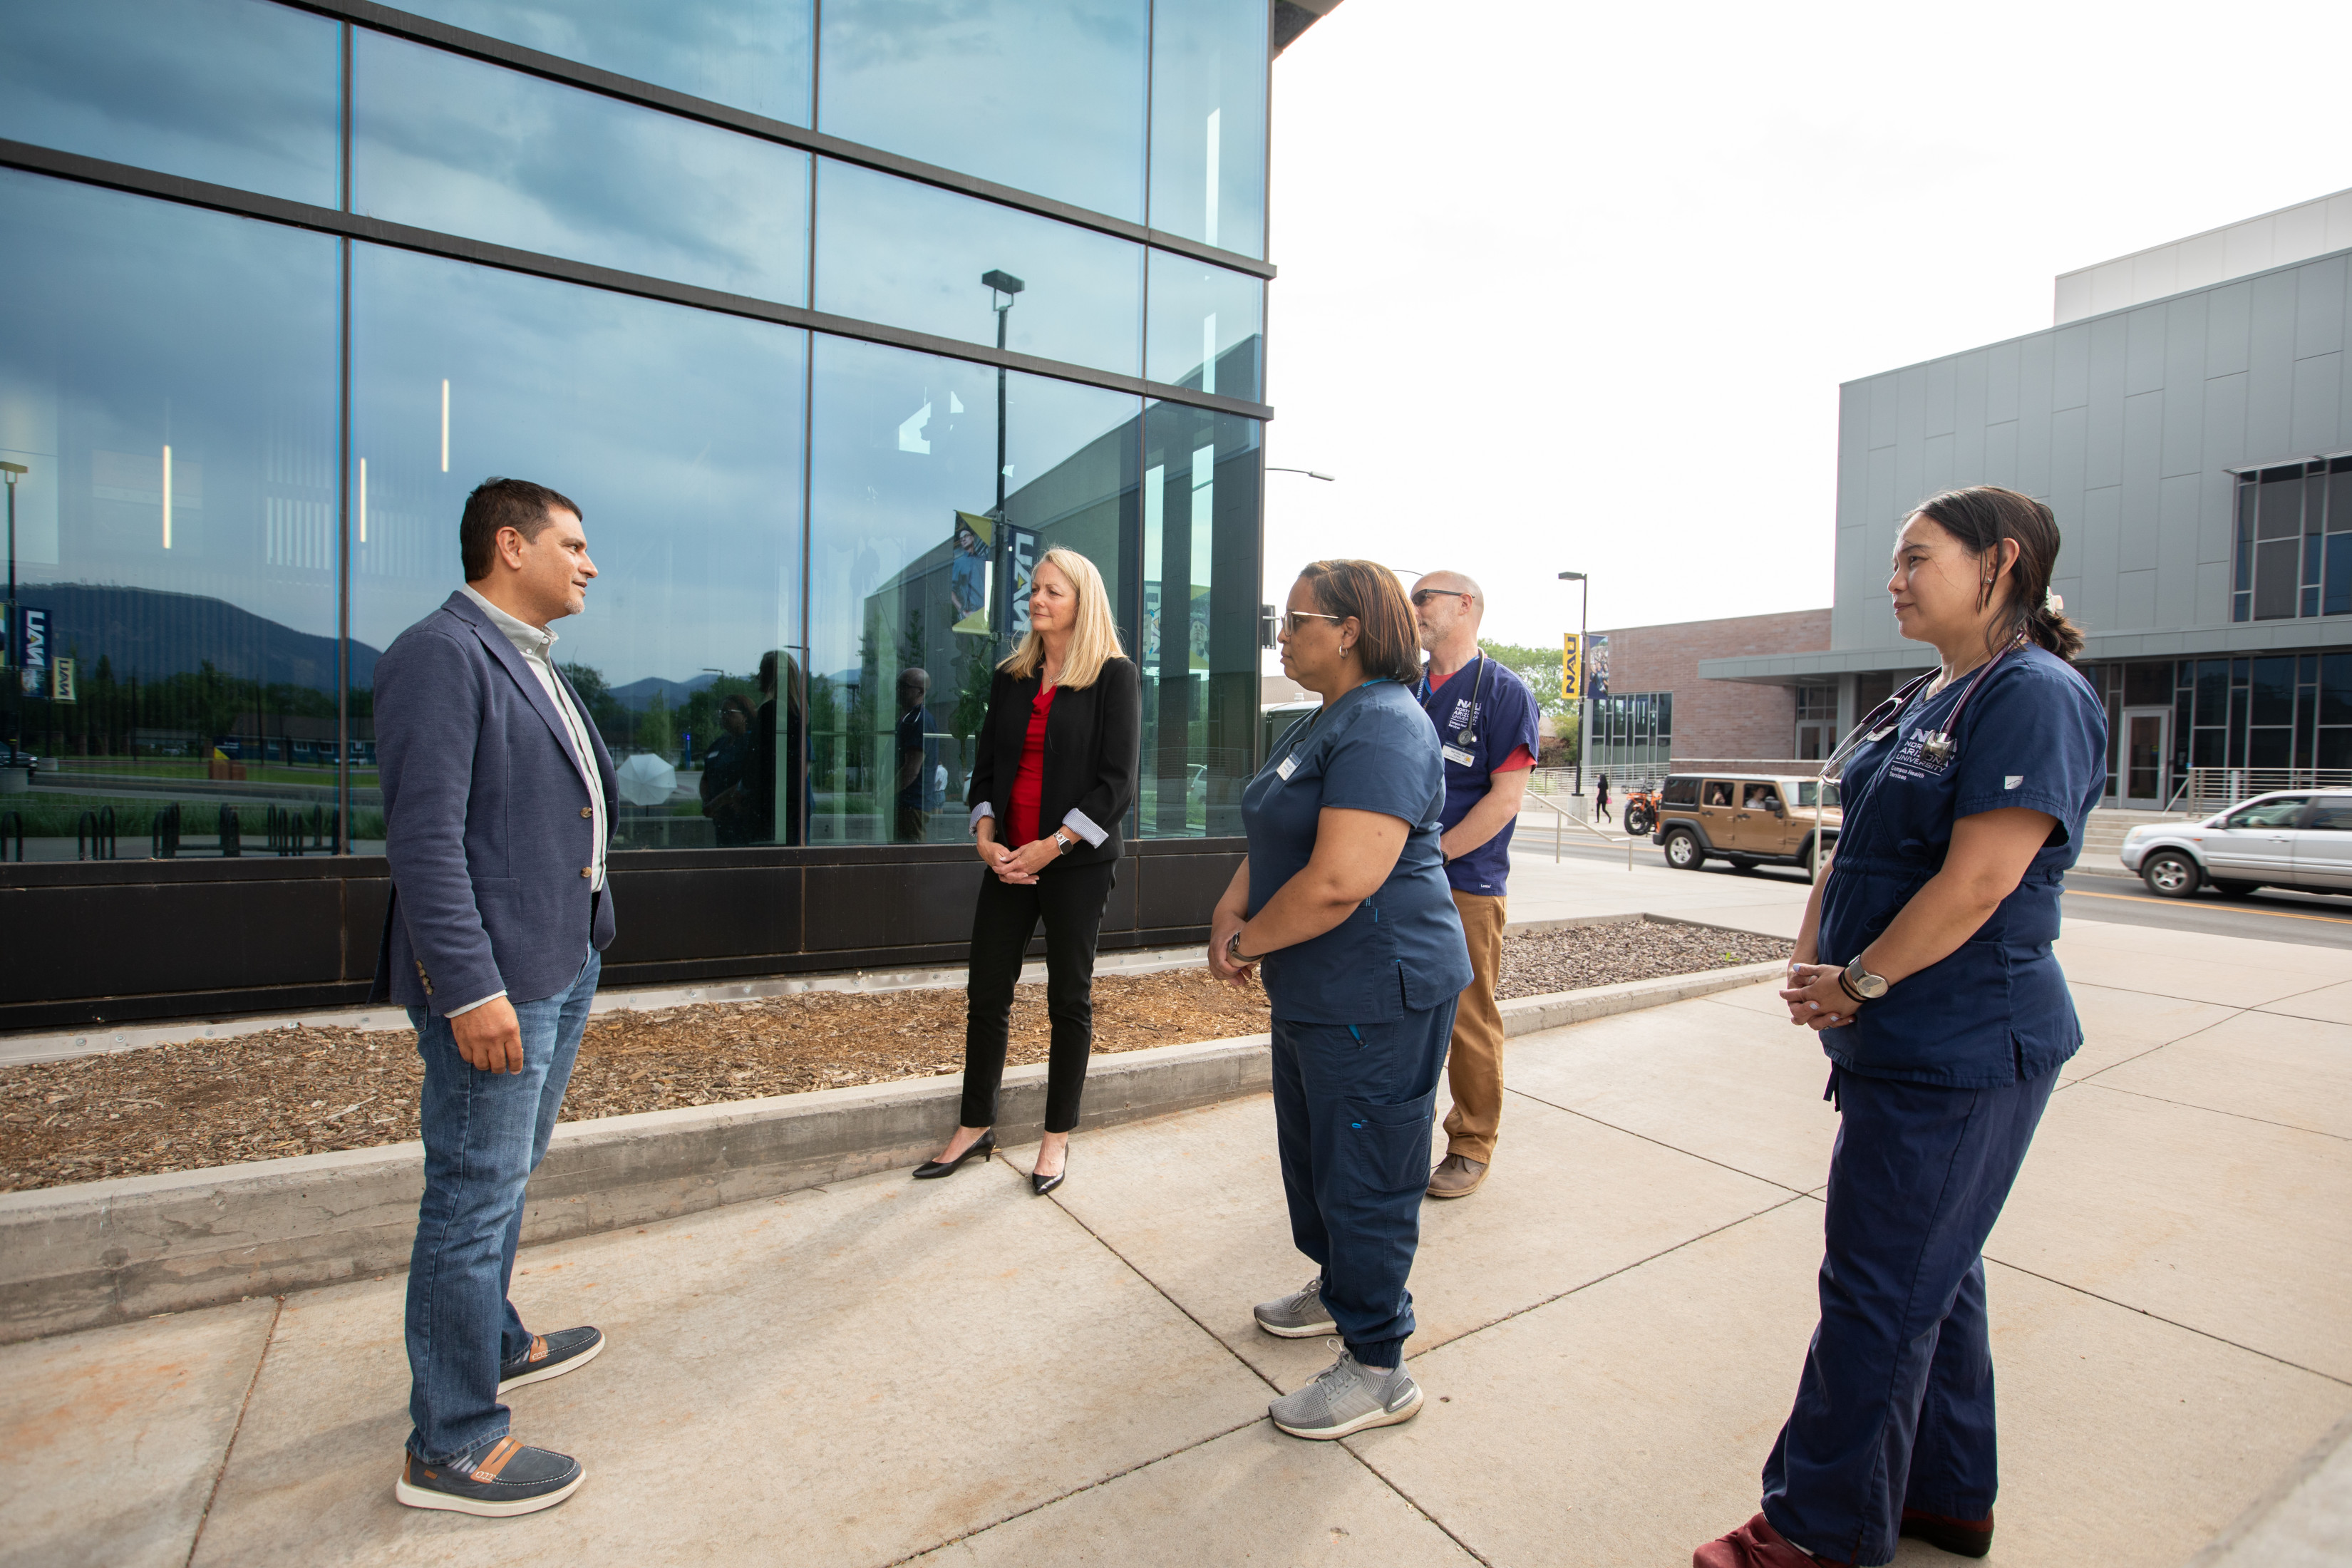 President Dr. Jose Luis Cruz Rivera speaks with a small group of people wearing medical scrubs outside the NAU Health and Learning Center.